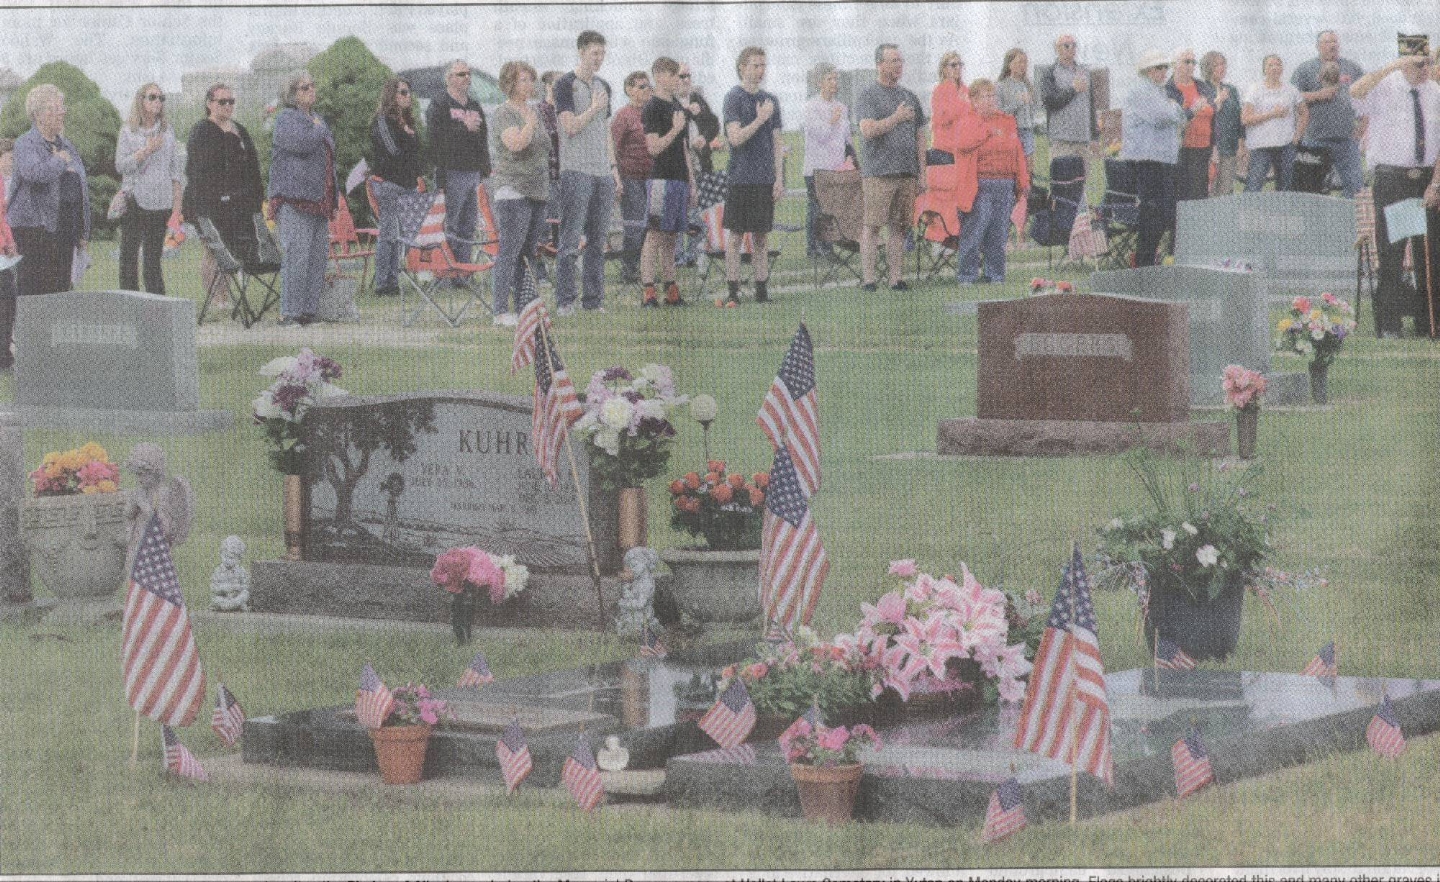 Memorial Day services, May 2021 at the Hollst Lawn Cemetary held by the VFW and American Legion.  Pictures by Suzi Nelson of the Wahoo Newspaper.  Used by permission.